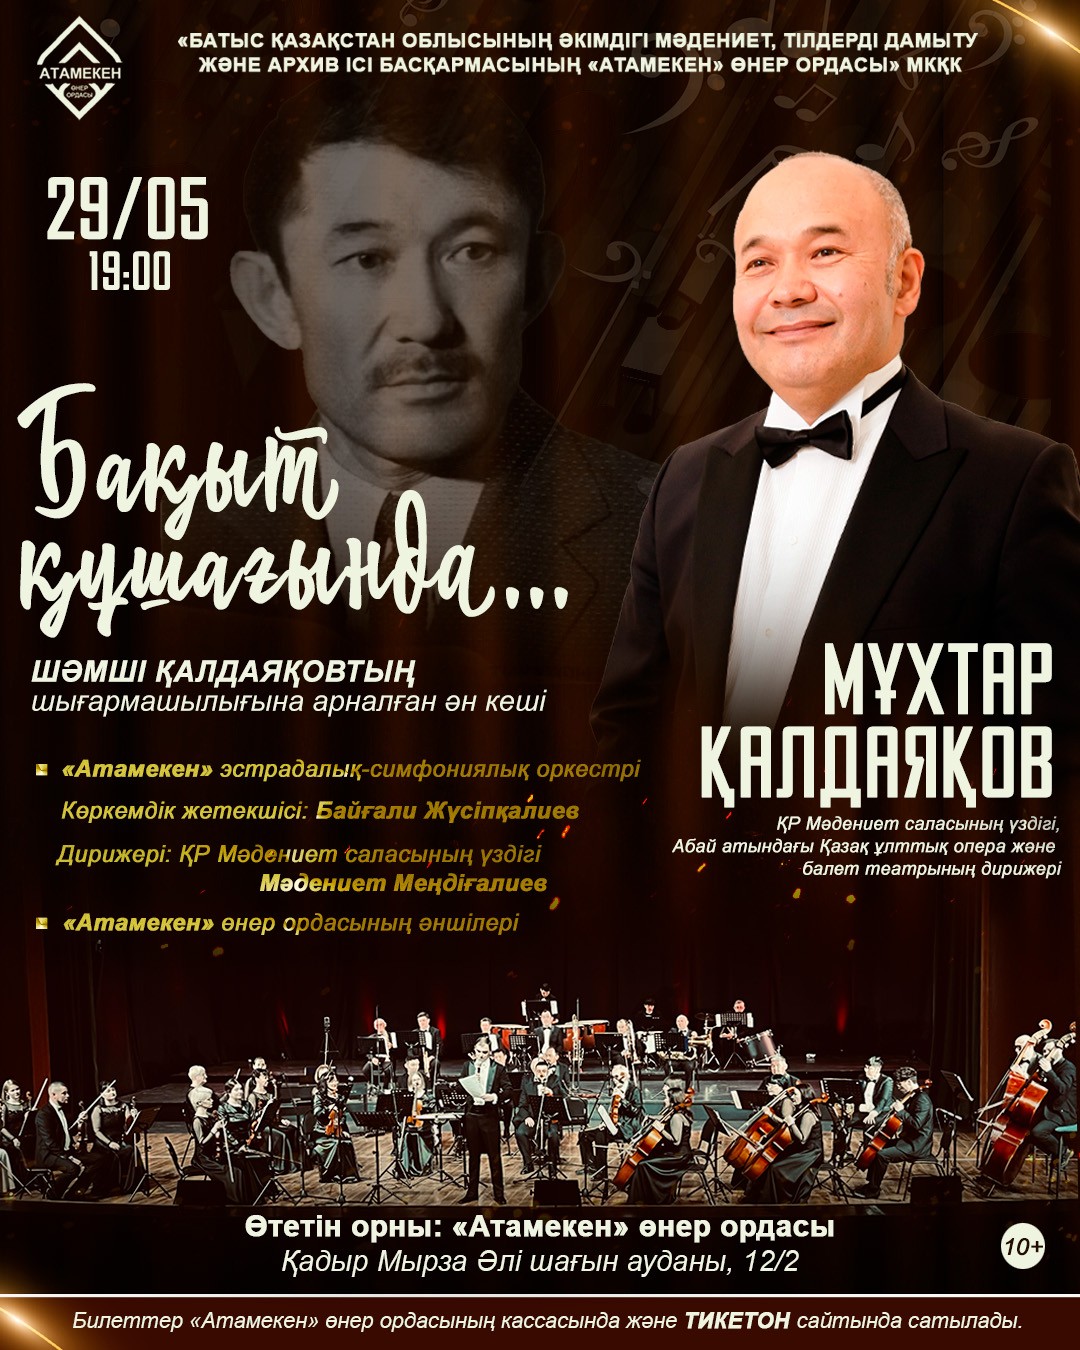 Evening of songs dedicated to the work of Shamshi Kaldayakov «in the arms of happiness»